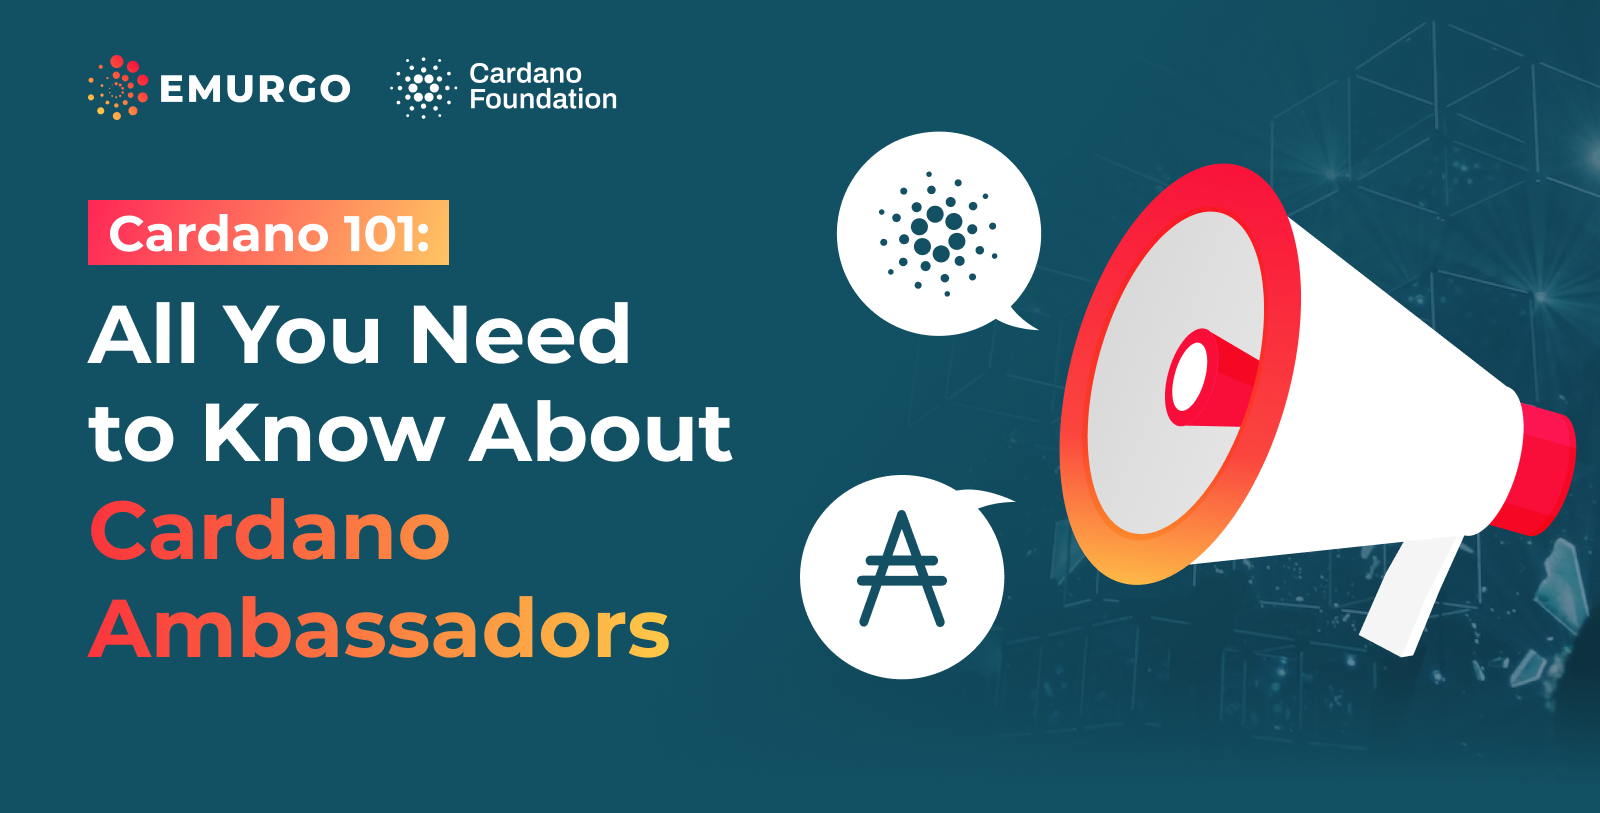 Cardano-101-All-You-Need-to-Know-About-Cardano-Ambassadors.png